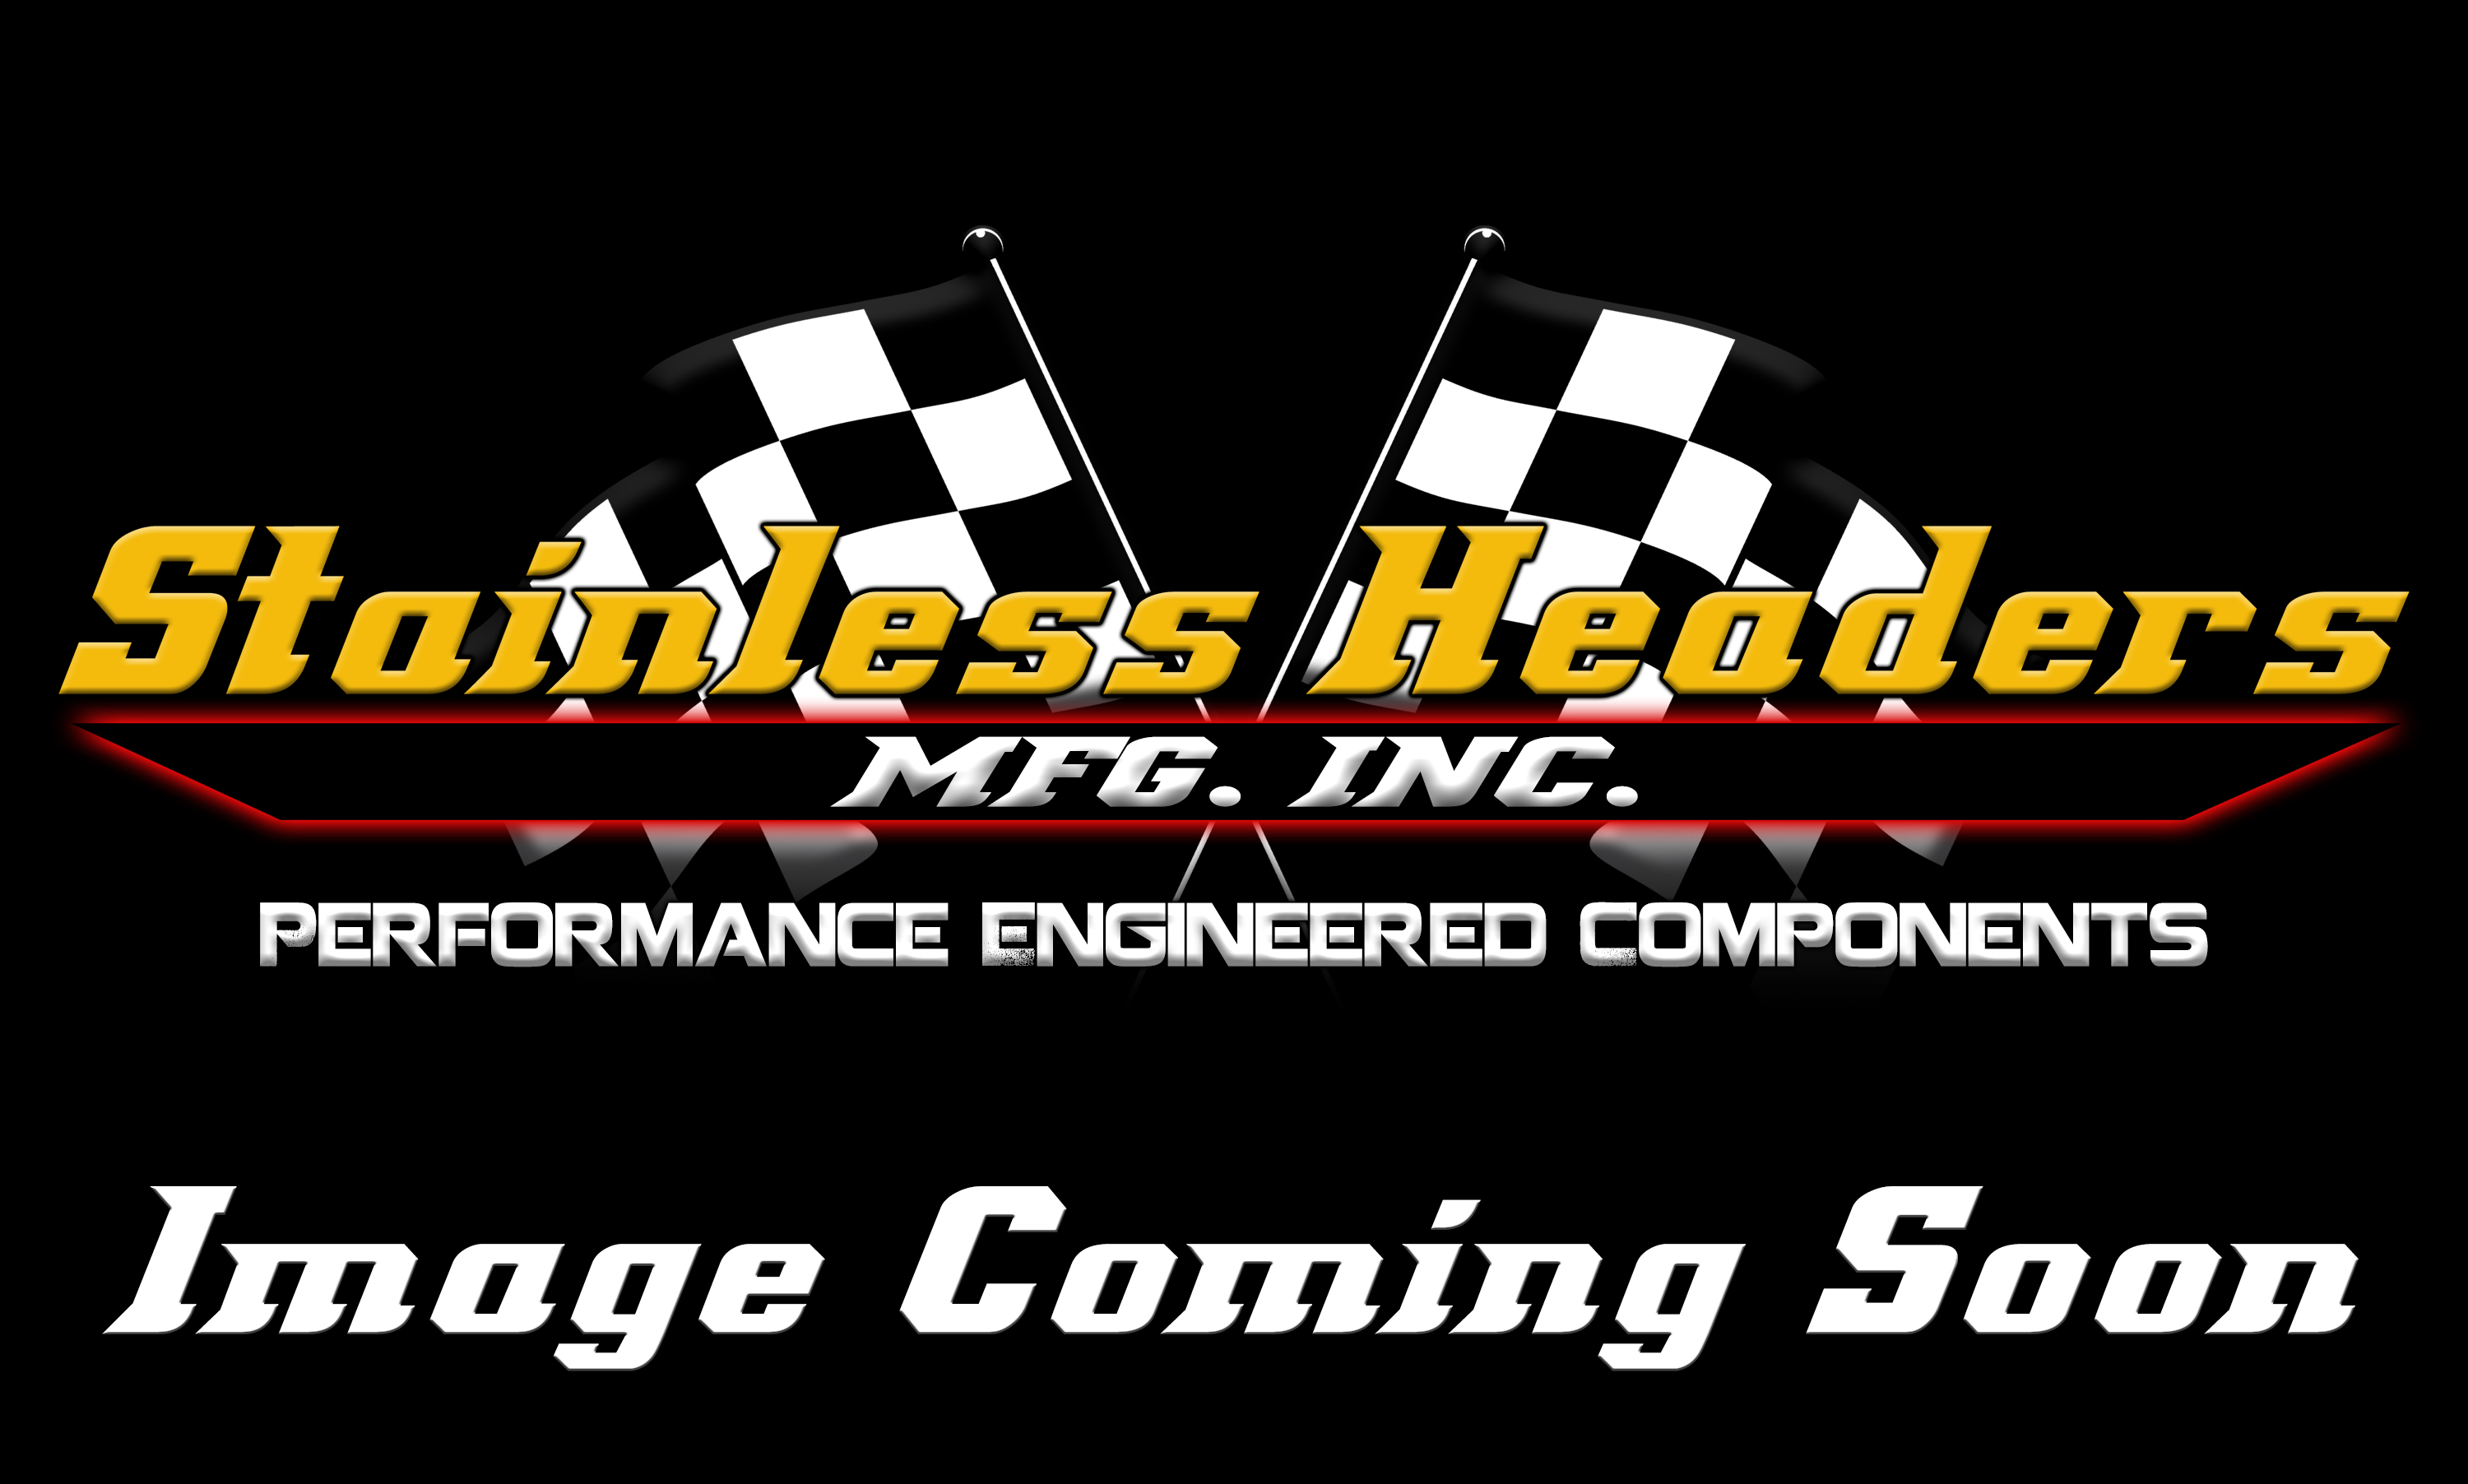 CompTurbo Technologies - CTR4202R-7285 Mid Frame Oil-Less 3.0 Turbocharger (1250 HP)